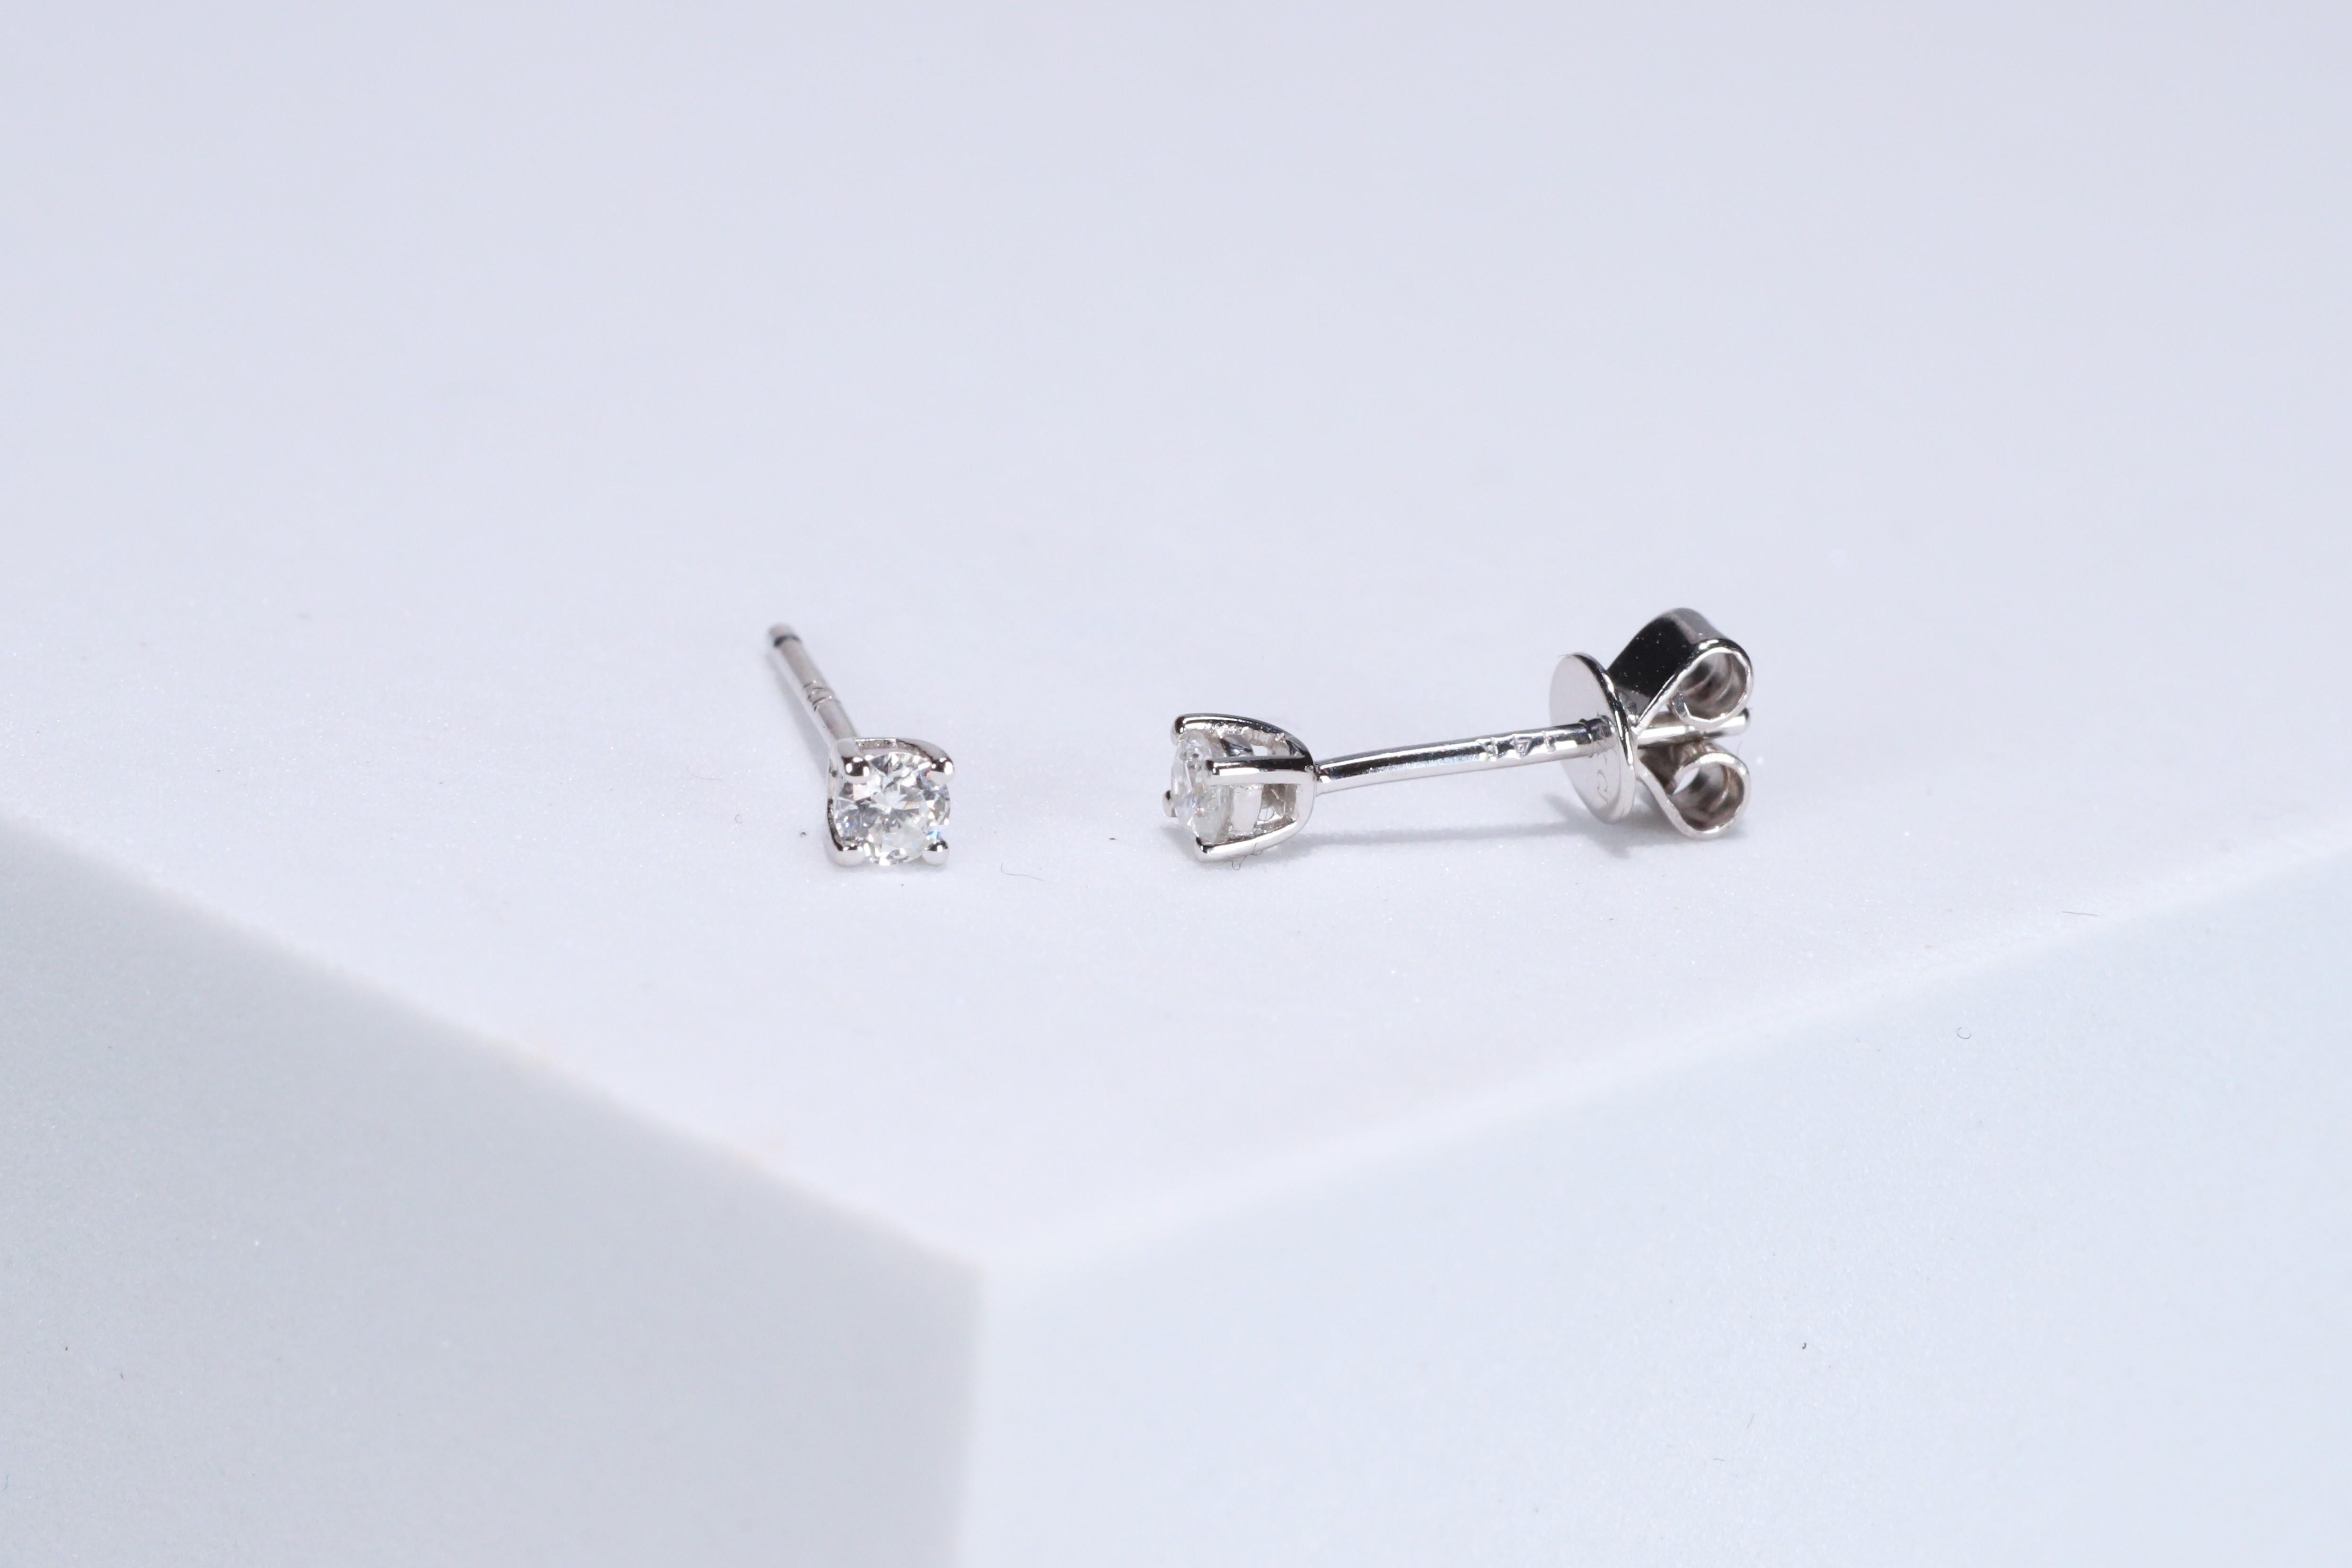 Decorate yourself in elegance with this Earring is crafted from 14-karat White Gold by Gin & Grace Earring. This Earring is made up of Round-cut White Diamond (2 pcs) 0.15 carat. This Earring is weight 0.63 grams. This delicate Earring is polished